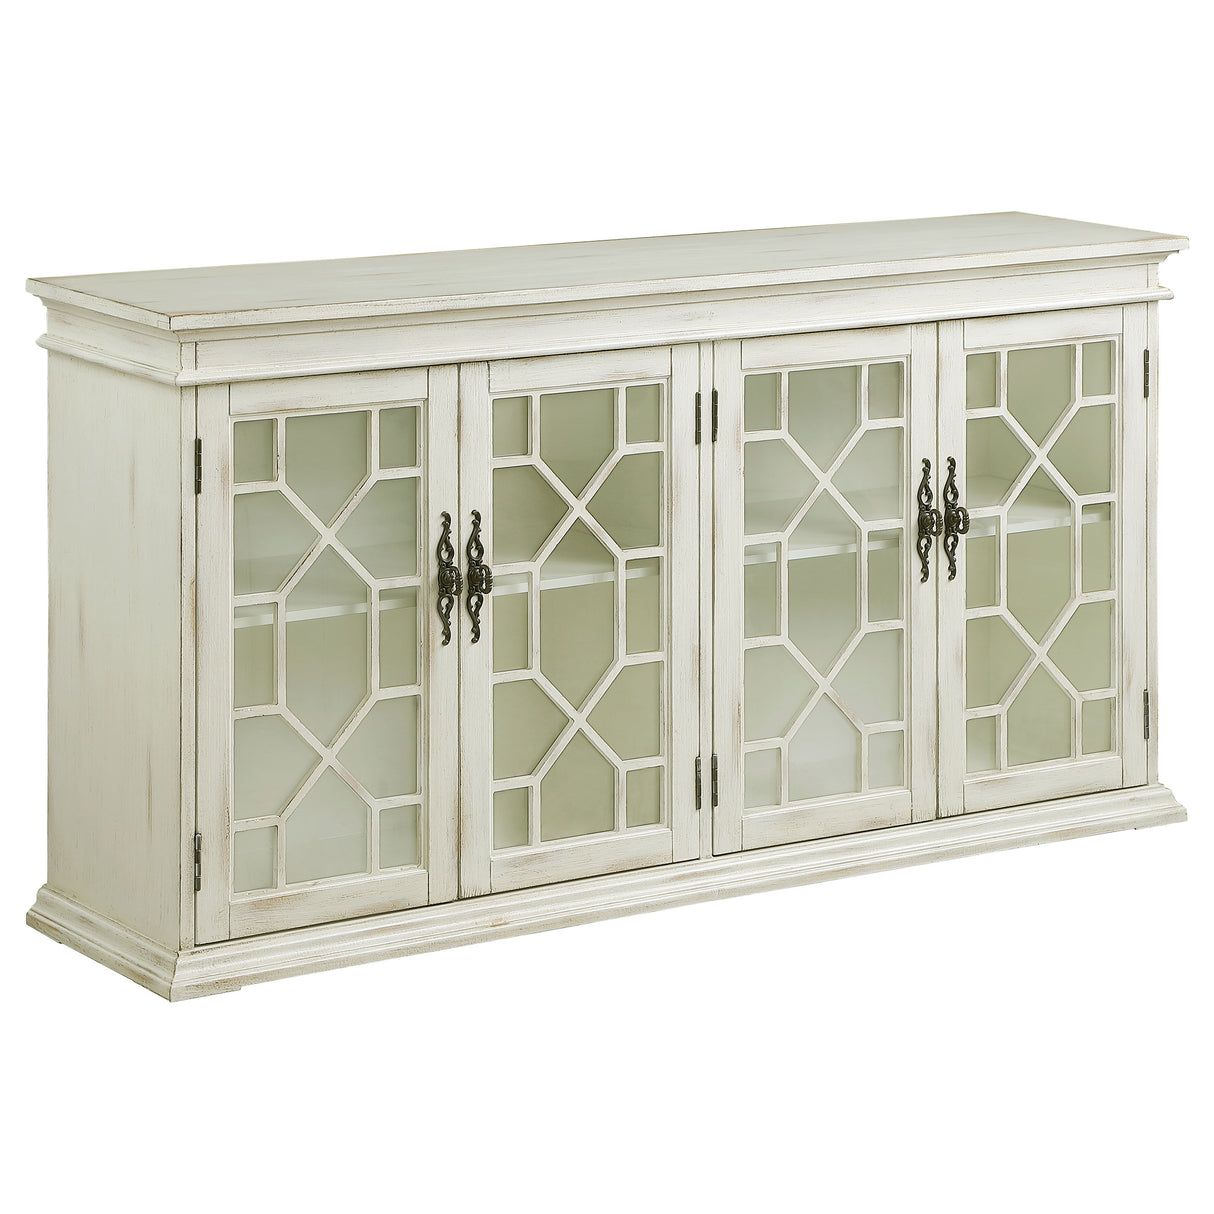 Accent Cabinet - Kiara 4-door Accent Cabinet with Adjustable Shelves White